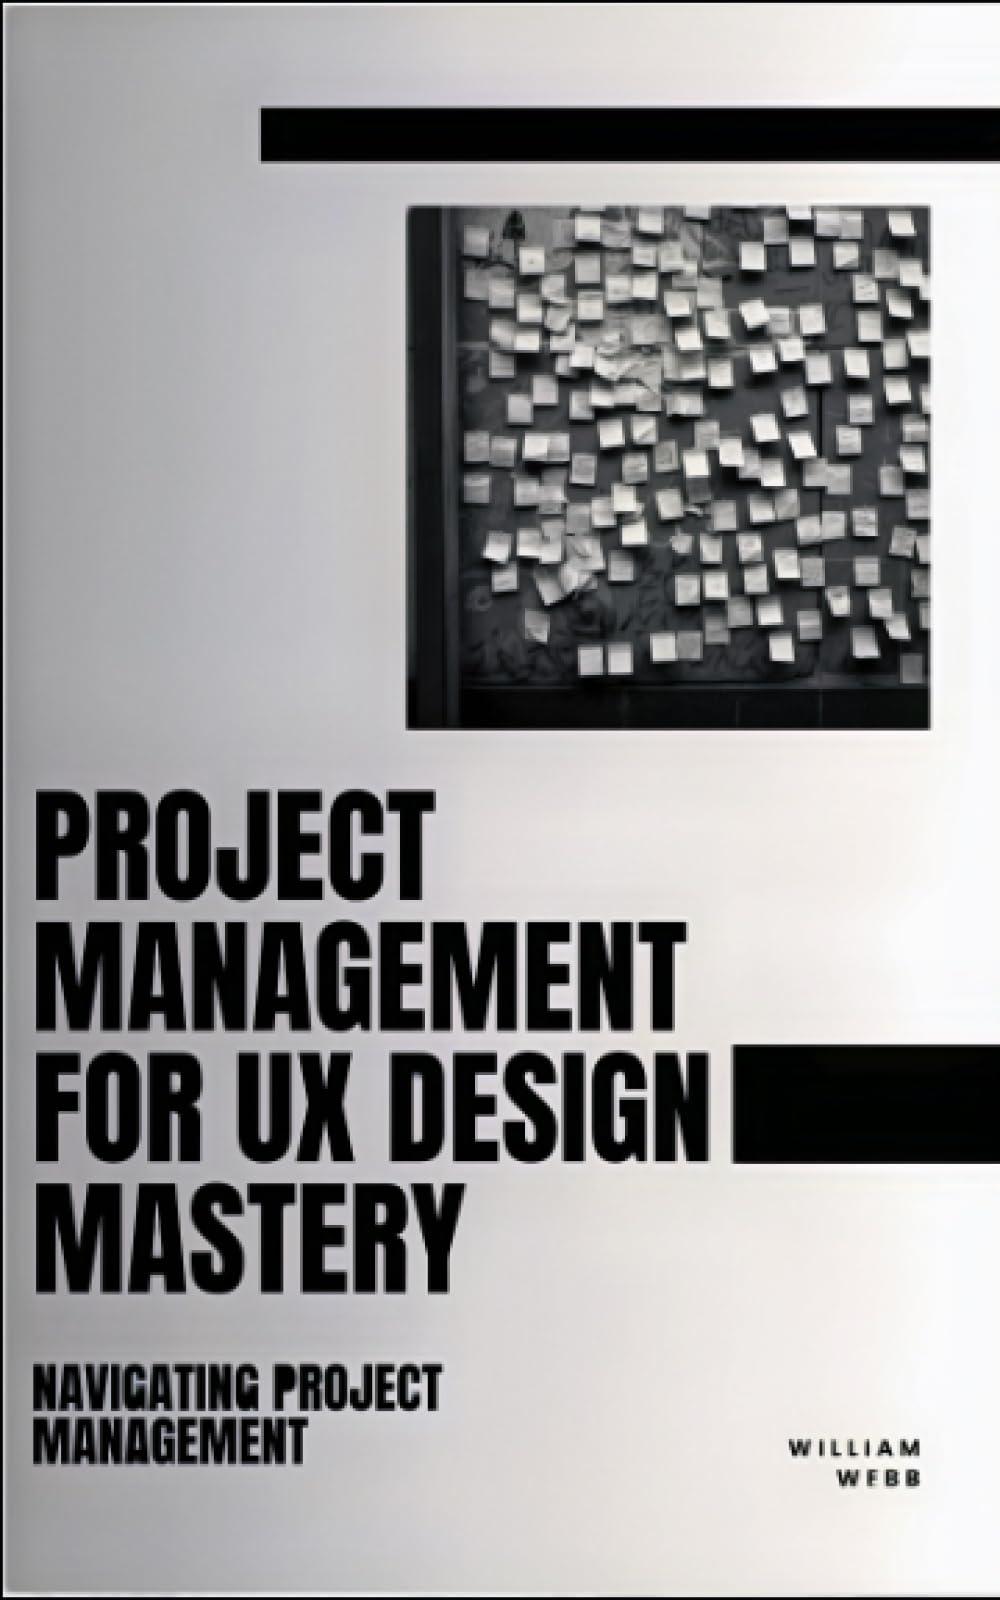 project management for ux design mastery navigating project management 1st edition william webb 8223430398,